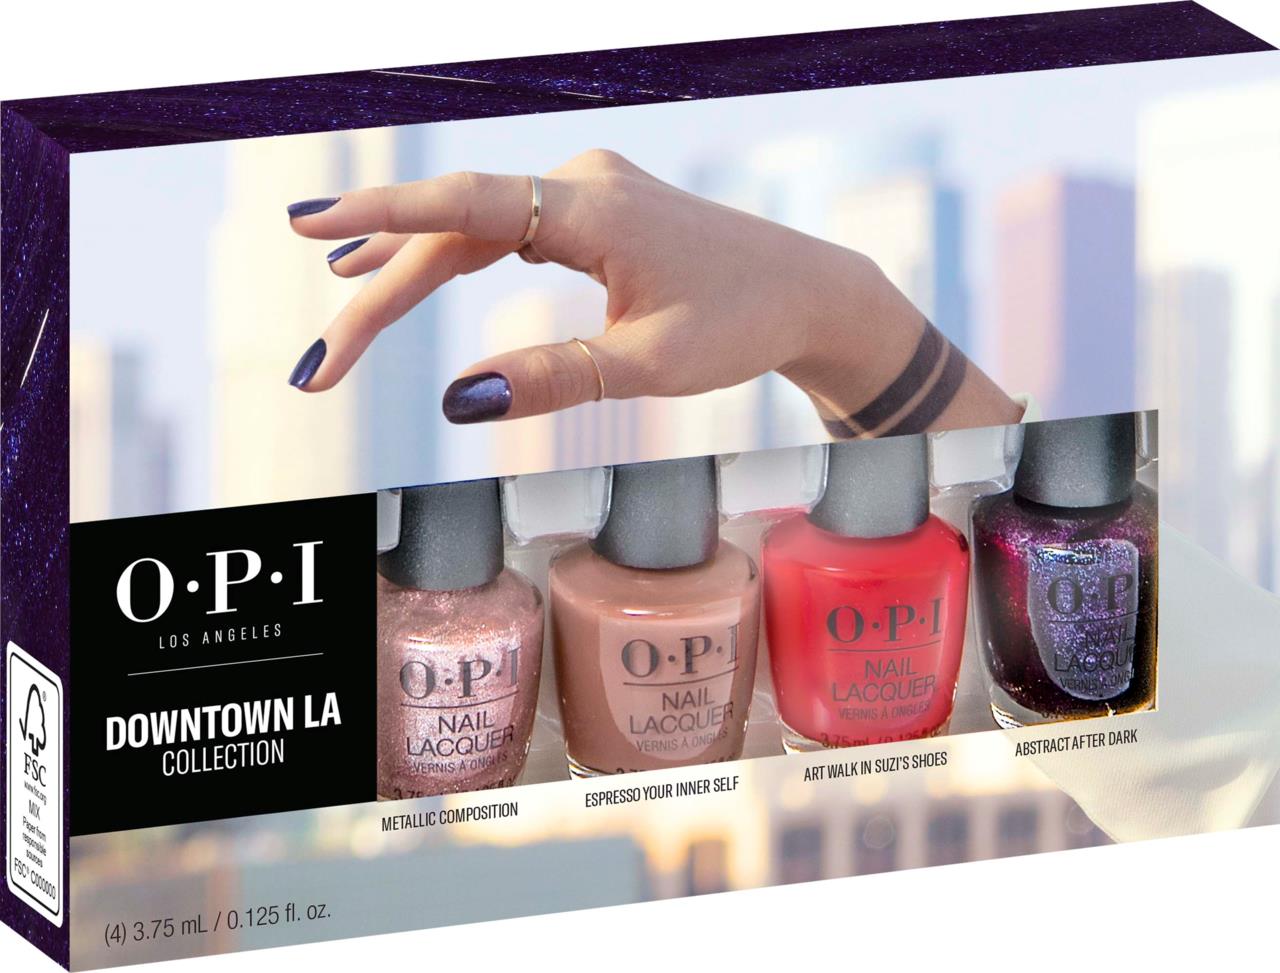 1. OPI Nail Lacquer in "Fig" - wide 2